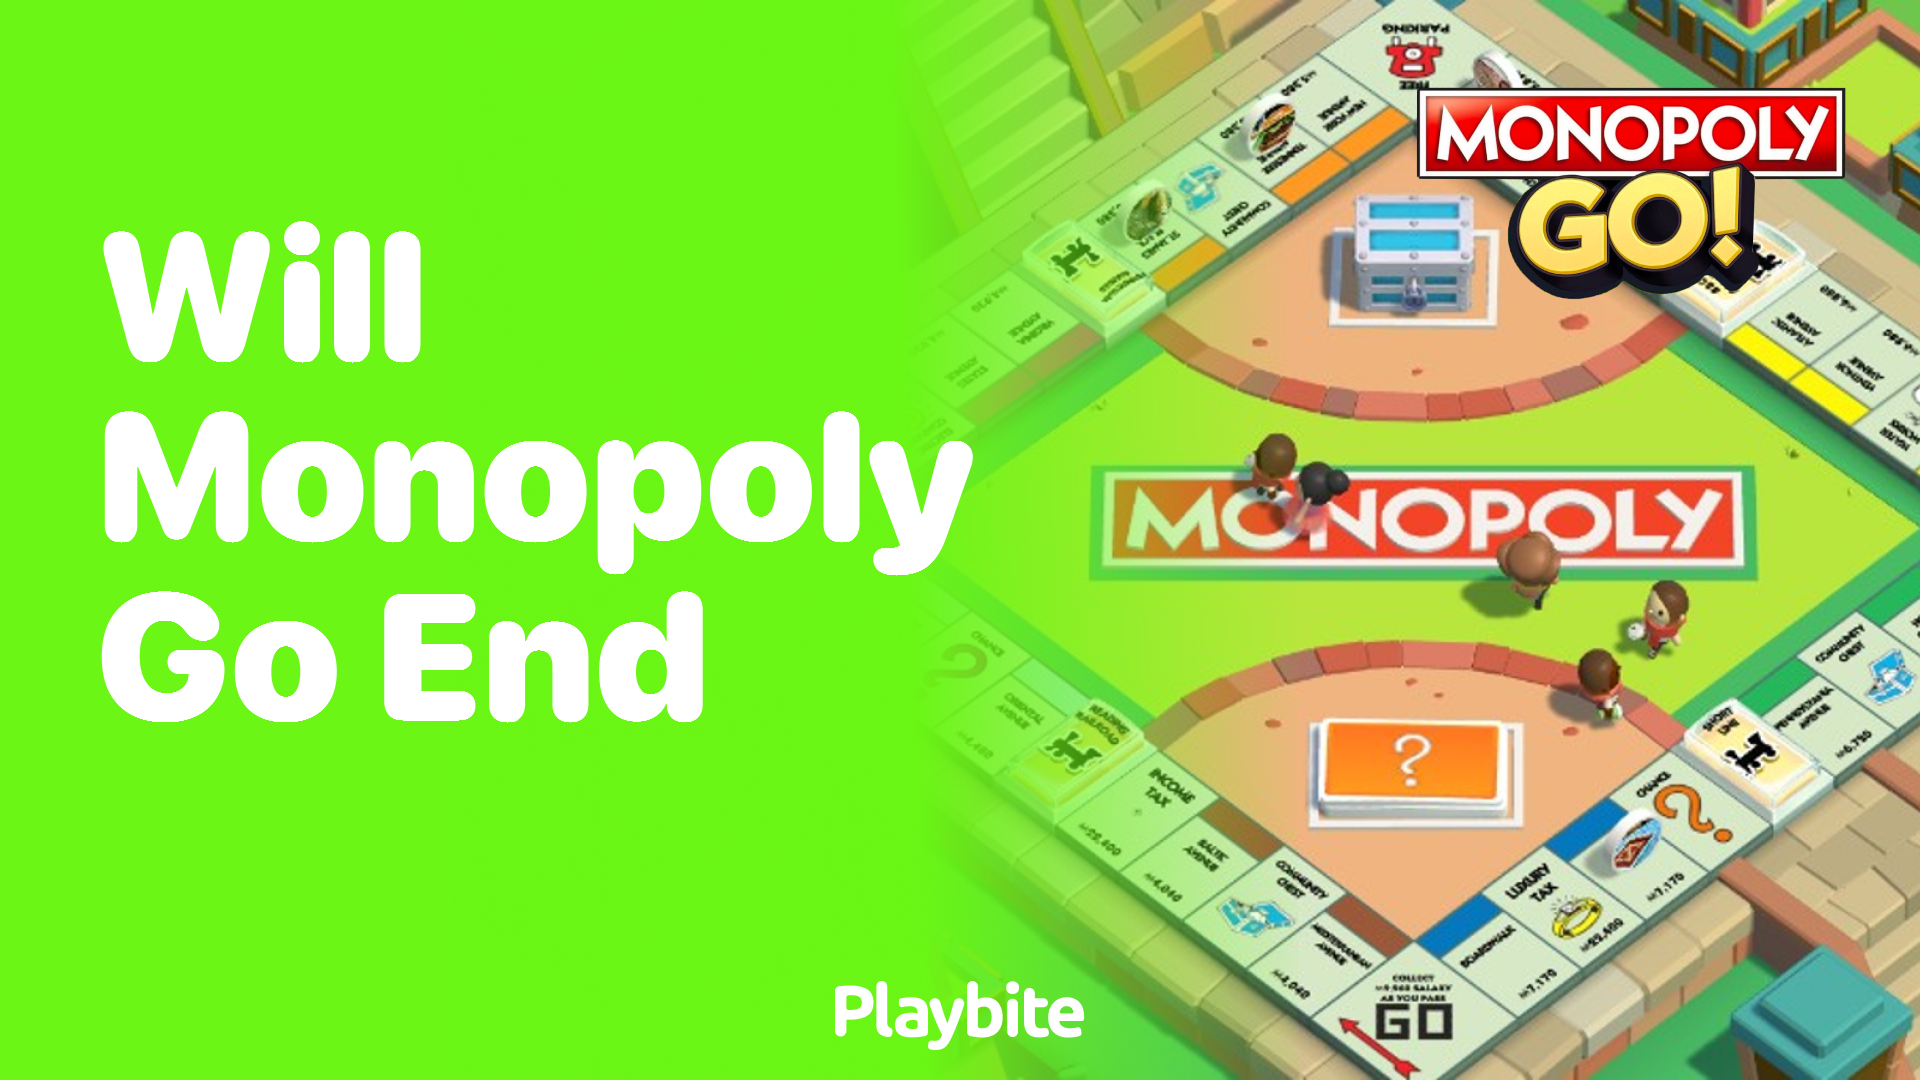 Will Monopoly Go Ever End?